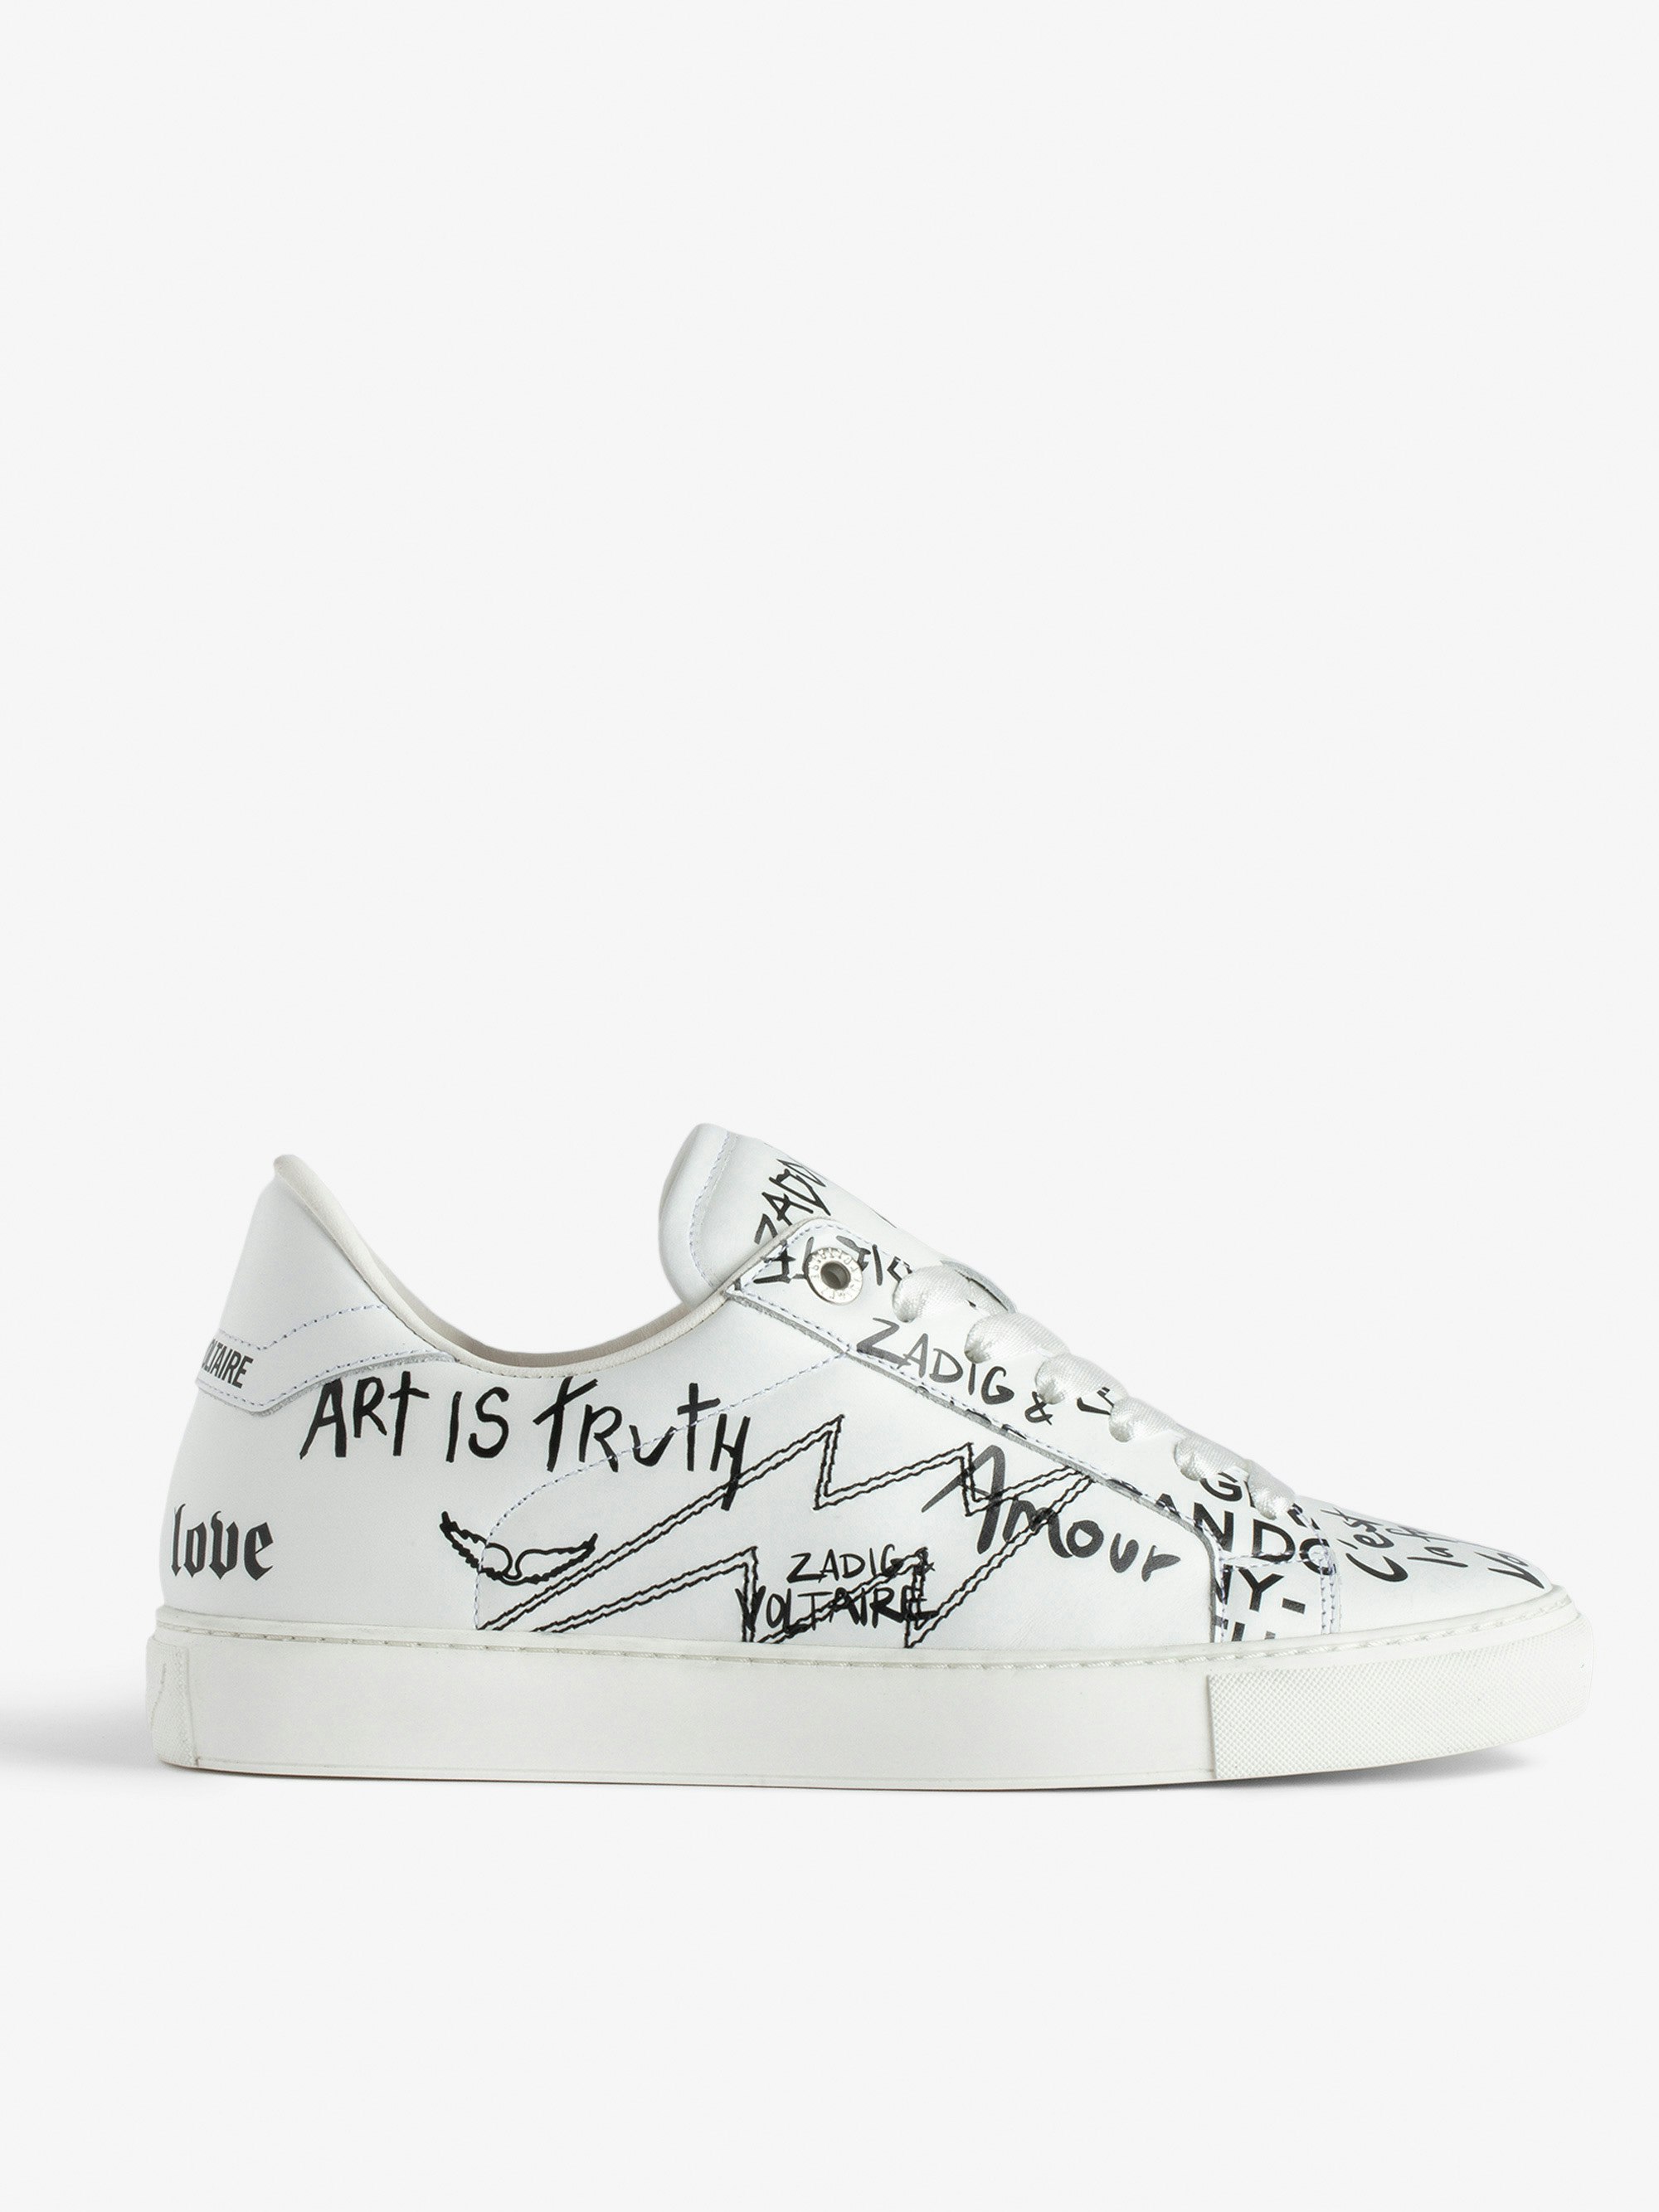 ZV1747 La Flash Low-Top Graffiti Sneakers - Women’s white smooth leather low-top sneakers with lightning bolt panels and graffiti.